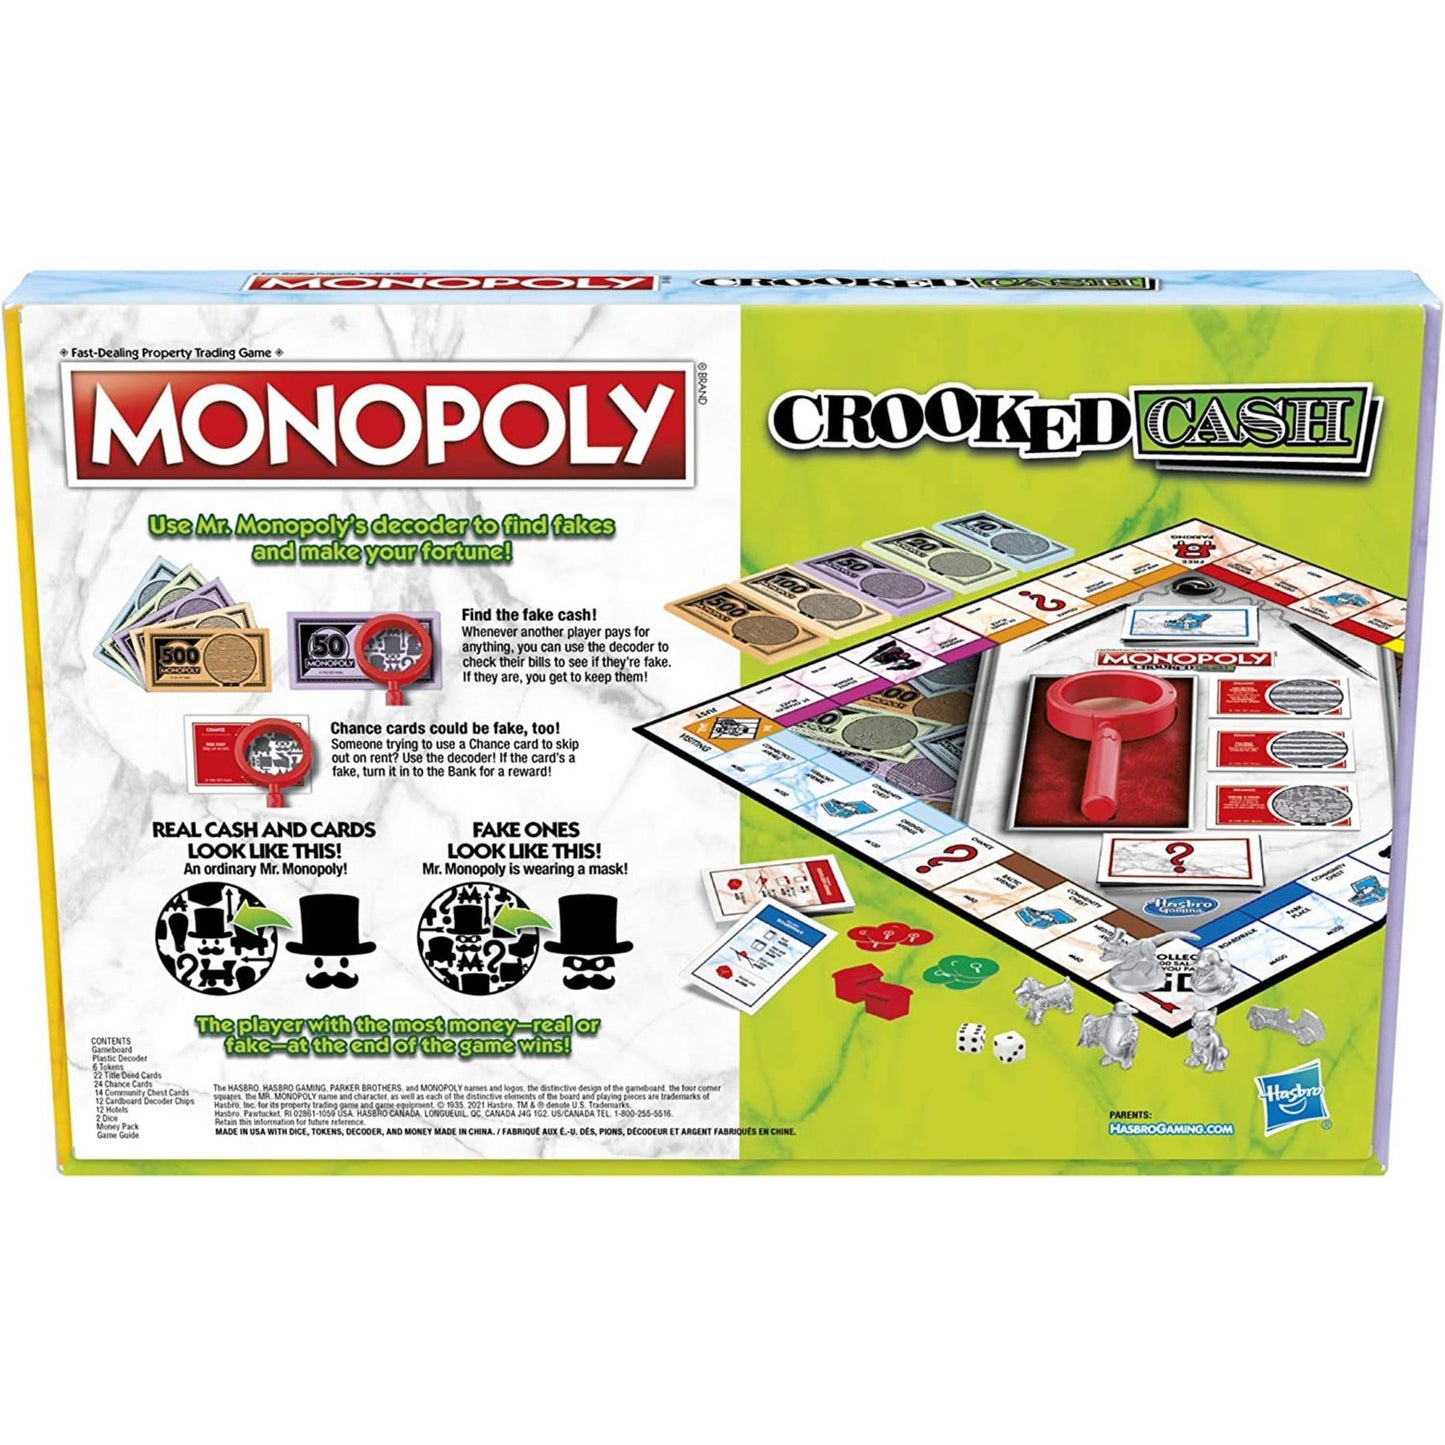 Monopoly Crooked Cash Edition Board game by Monopoly - UKBuyZone